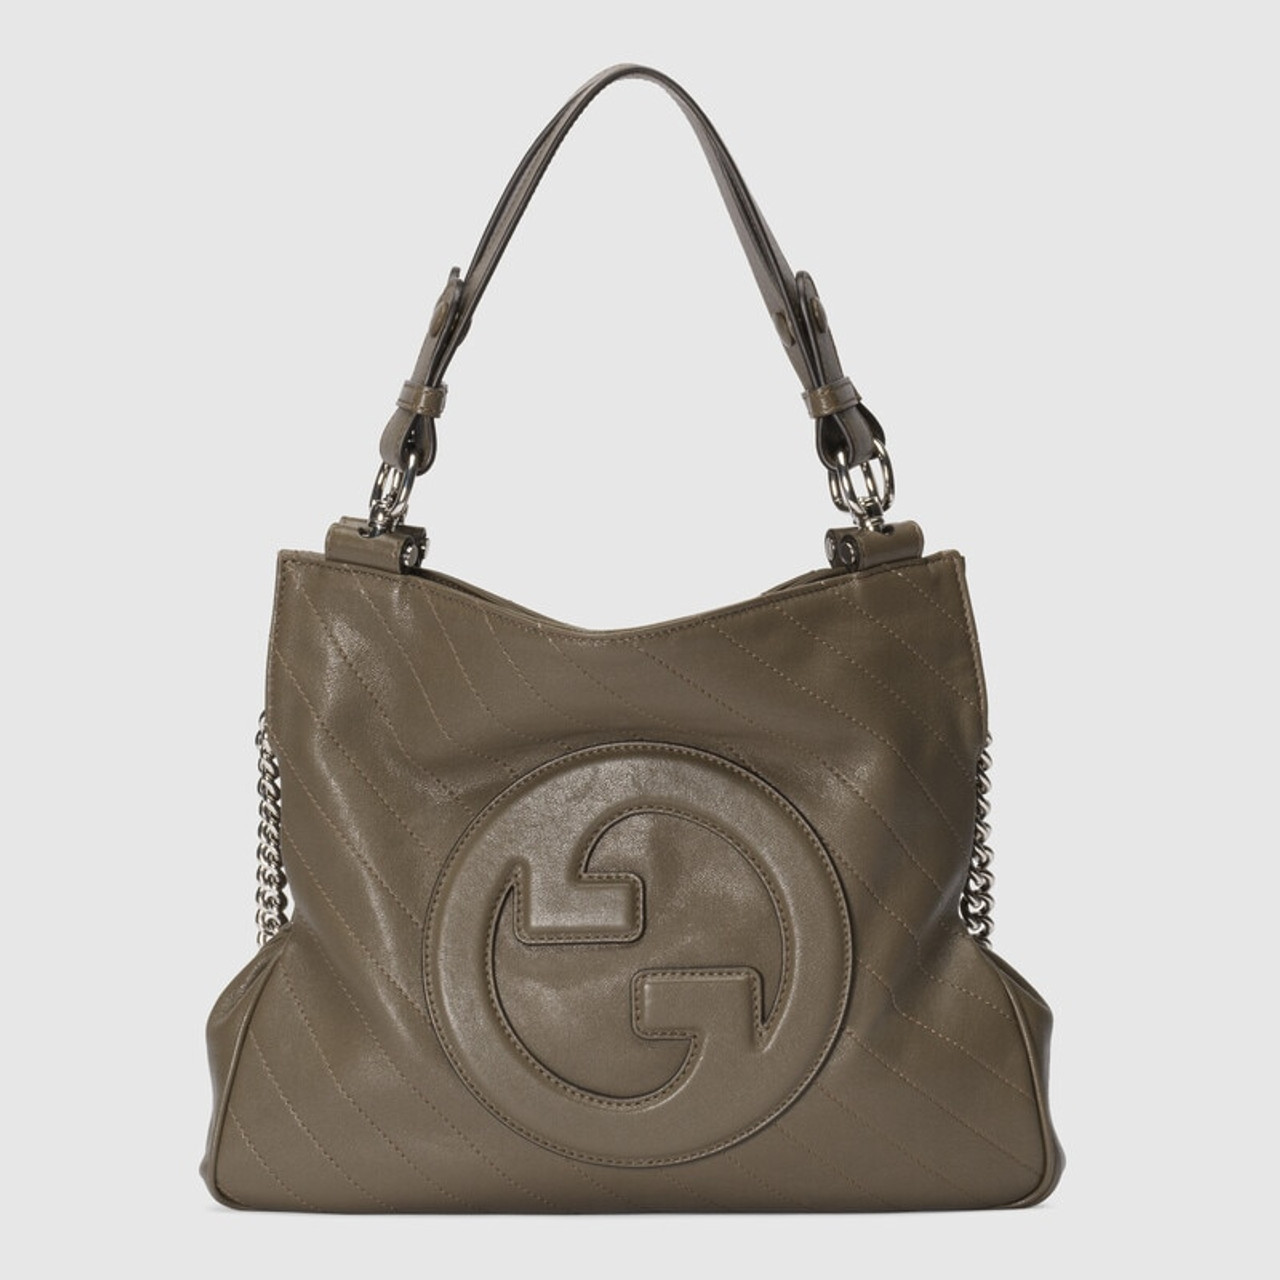 GUCCI Blondie Small Tote Bag